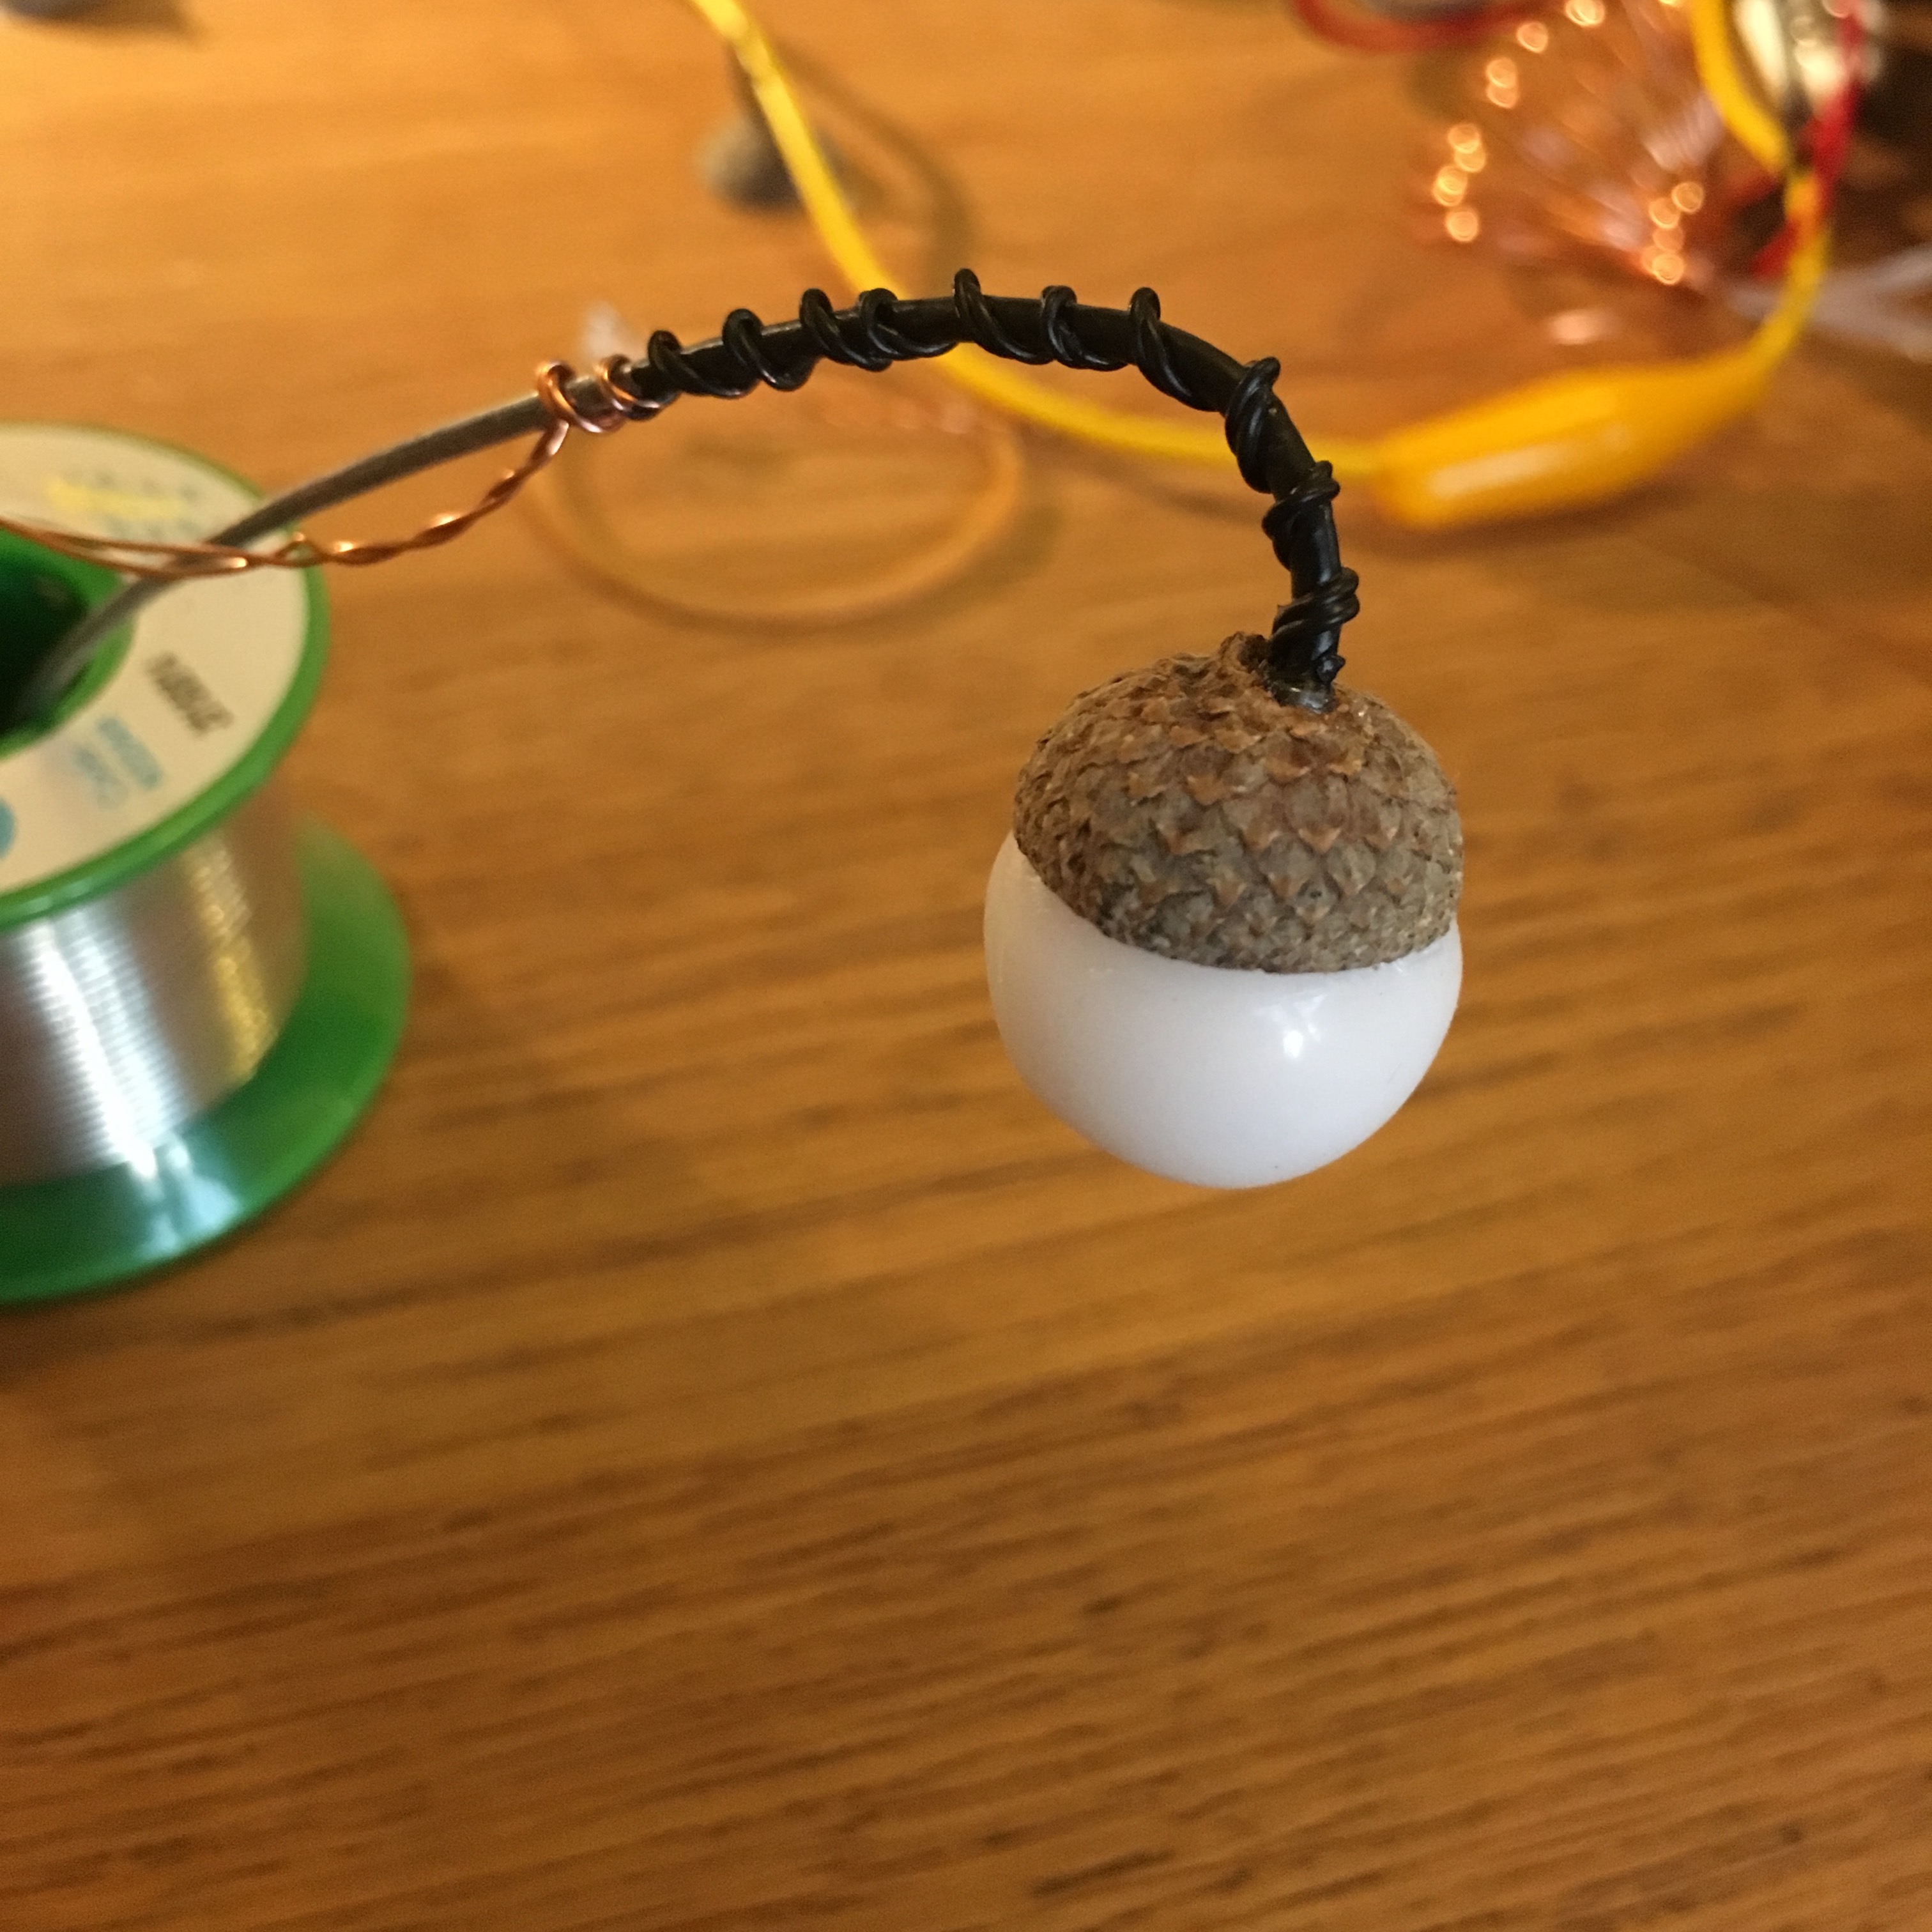 Wire leads to a white orb topped with an acorn cap